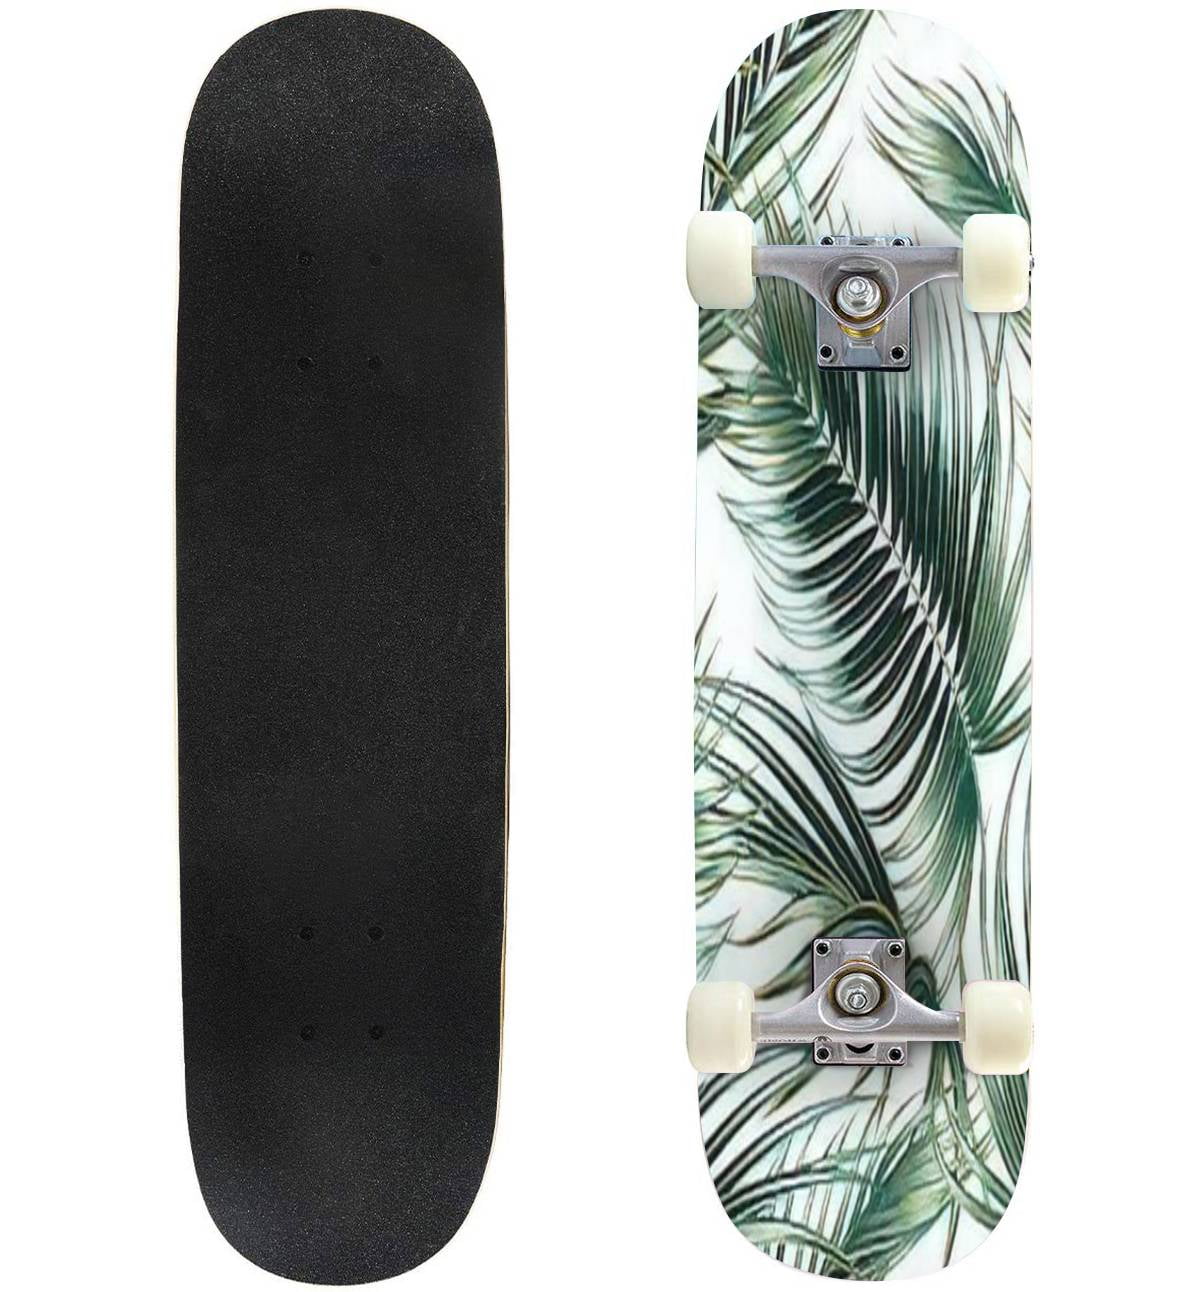 Tropical leaves jungle leaf seamless vector floral pattern Outdoor Skateboard 31"x8" Pro Complete Skate Cruiser 8 Layers Double Concave Deck Maple Longboards for Youths Sports - Walmart.com